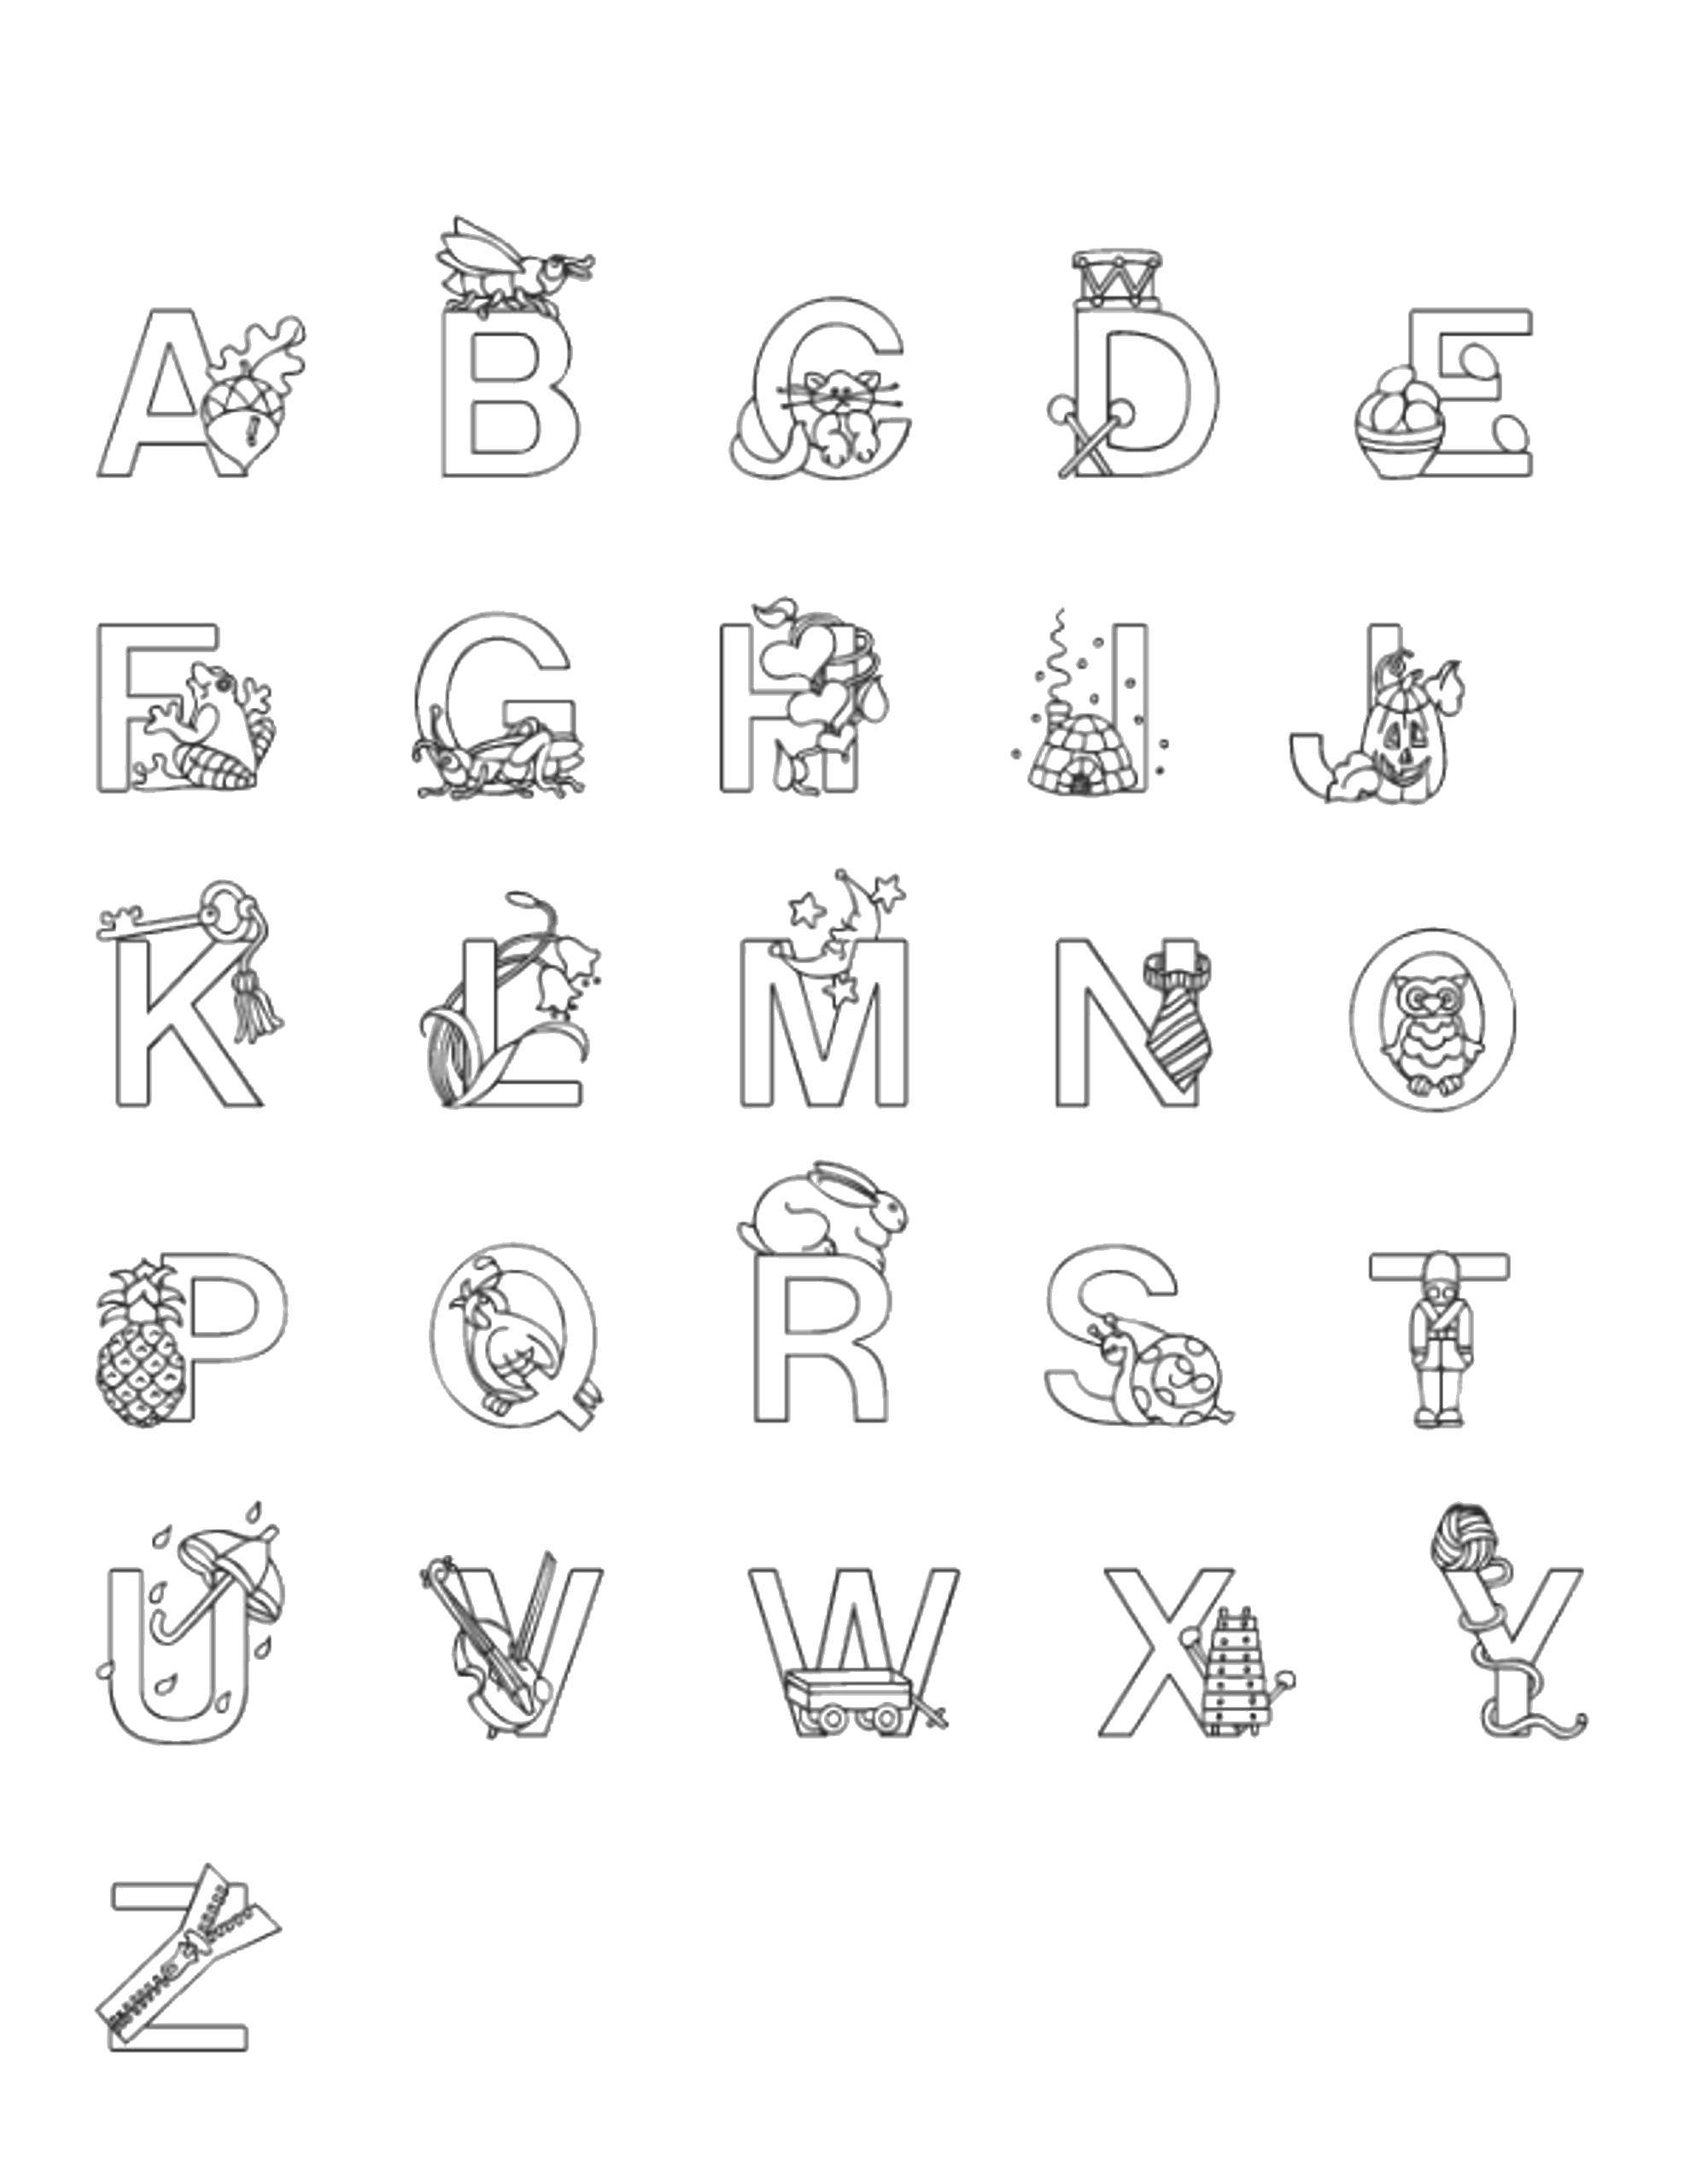 Coloring The English alphabet. Category English alphabet. Tags:  The alphabet, letters, words.